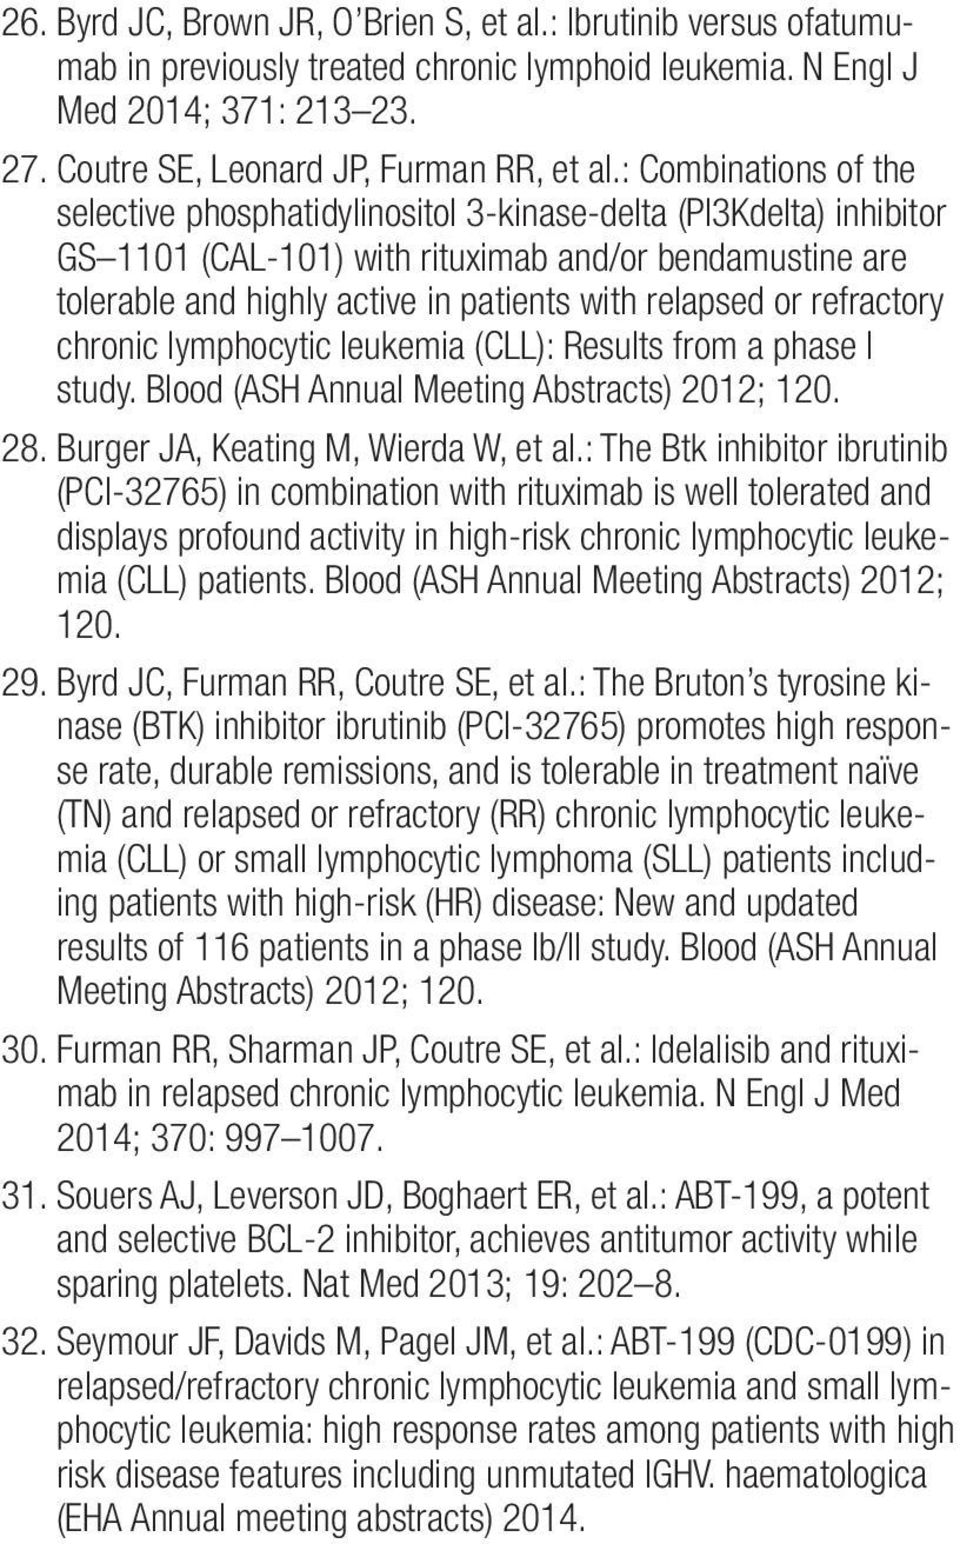 relapsed or refractory chronic lymphocytic leukemia (CLL): Results from a phase I study. Blood (ASH Annual Meeting Abstracts) 2012; 120. 28. Burger JA, Keating M, Wierda W, et al.